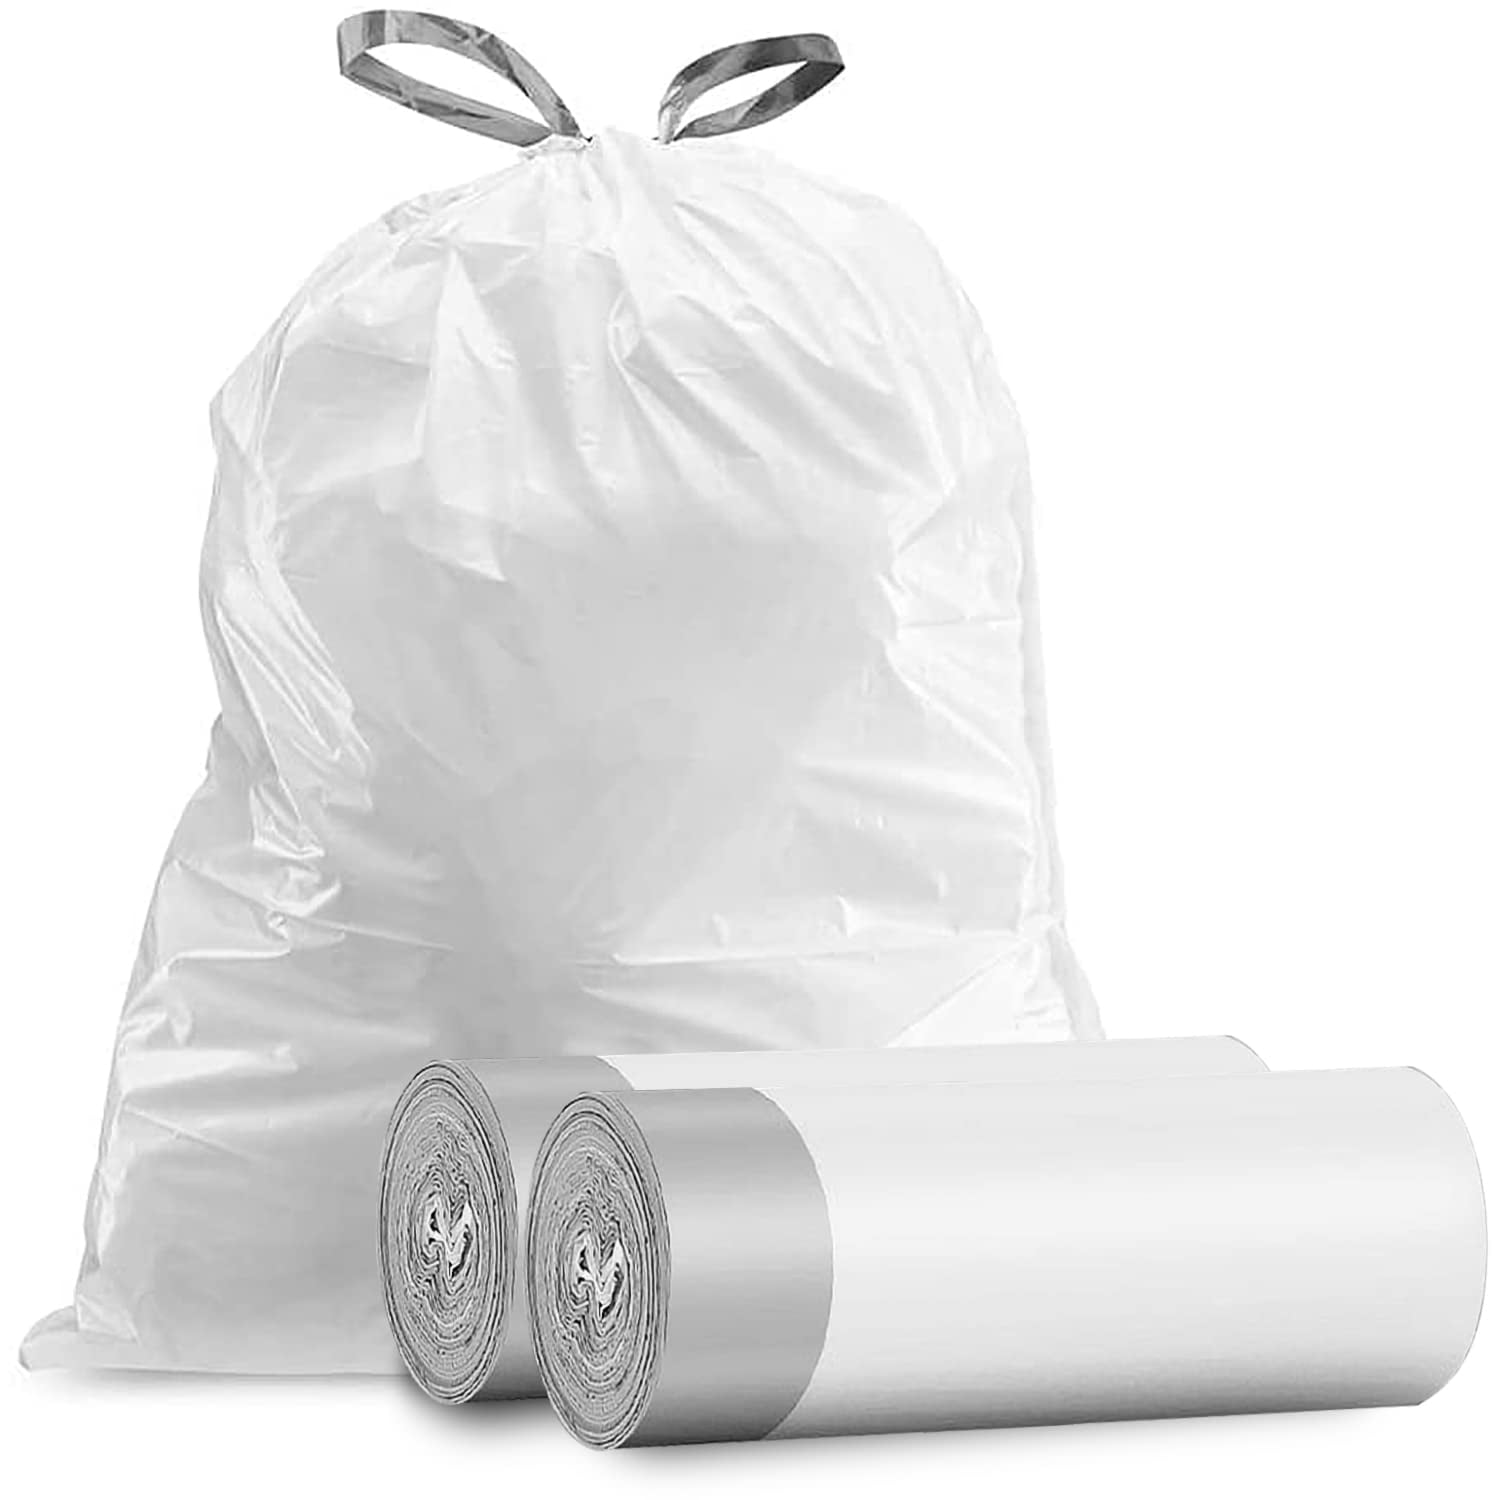  240 Counts Clear 8 Gallon Trash Bags ENK Medium Kitchen Garbage  Bags Large Bathroom Trash Bags Plastic Wastebasket Trash Can Liners for  Home Kitchen and Office,fit 7-8 Gallon,30 Liter Trash Bins 